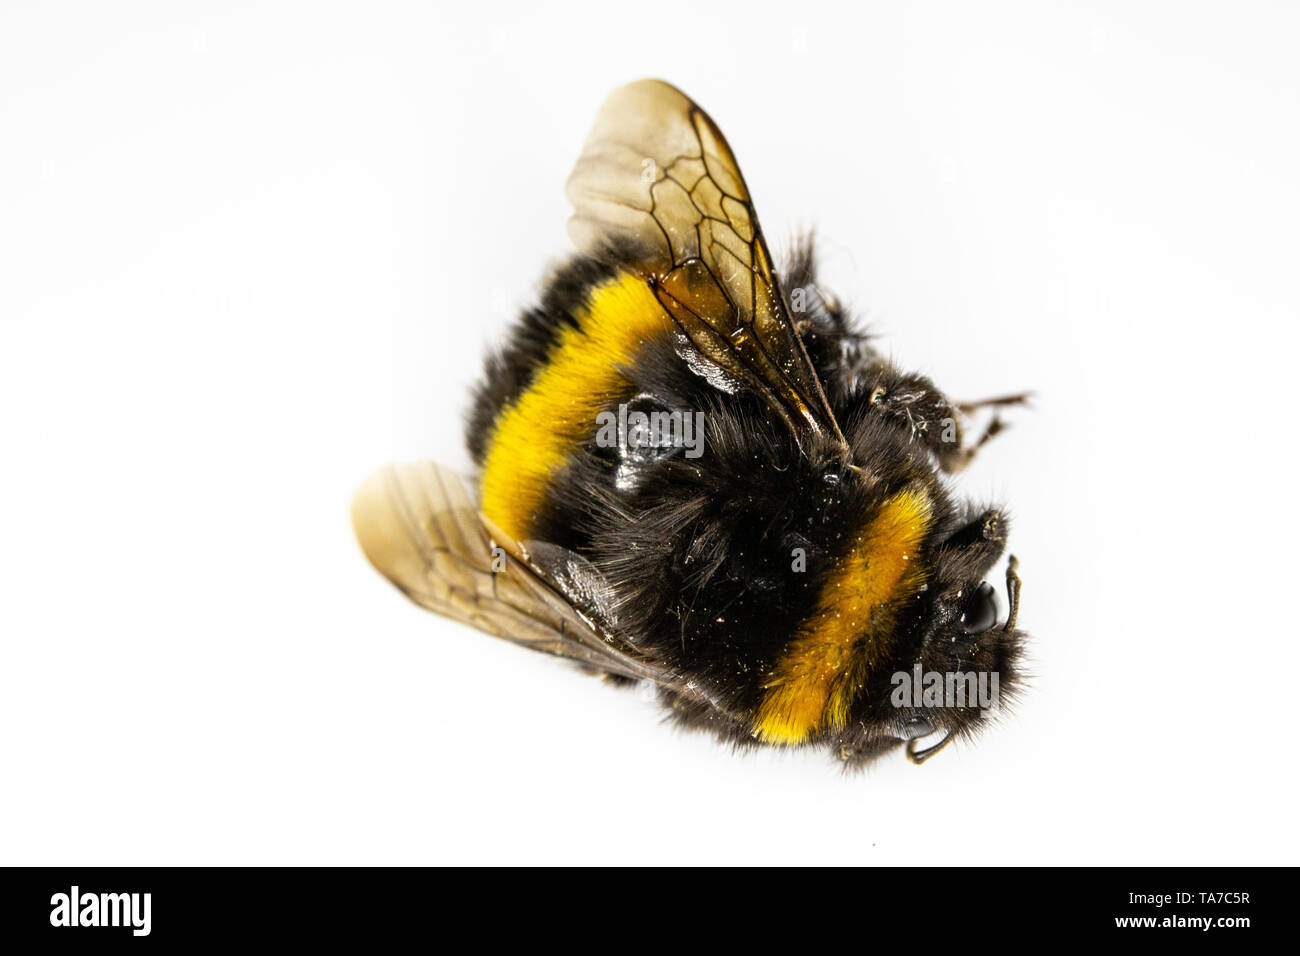 Dead Bumblebee Bee Insect on White Background Stock Photo